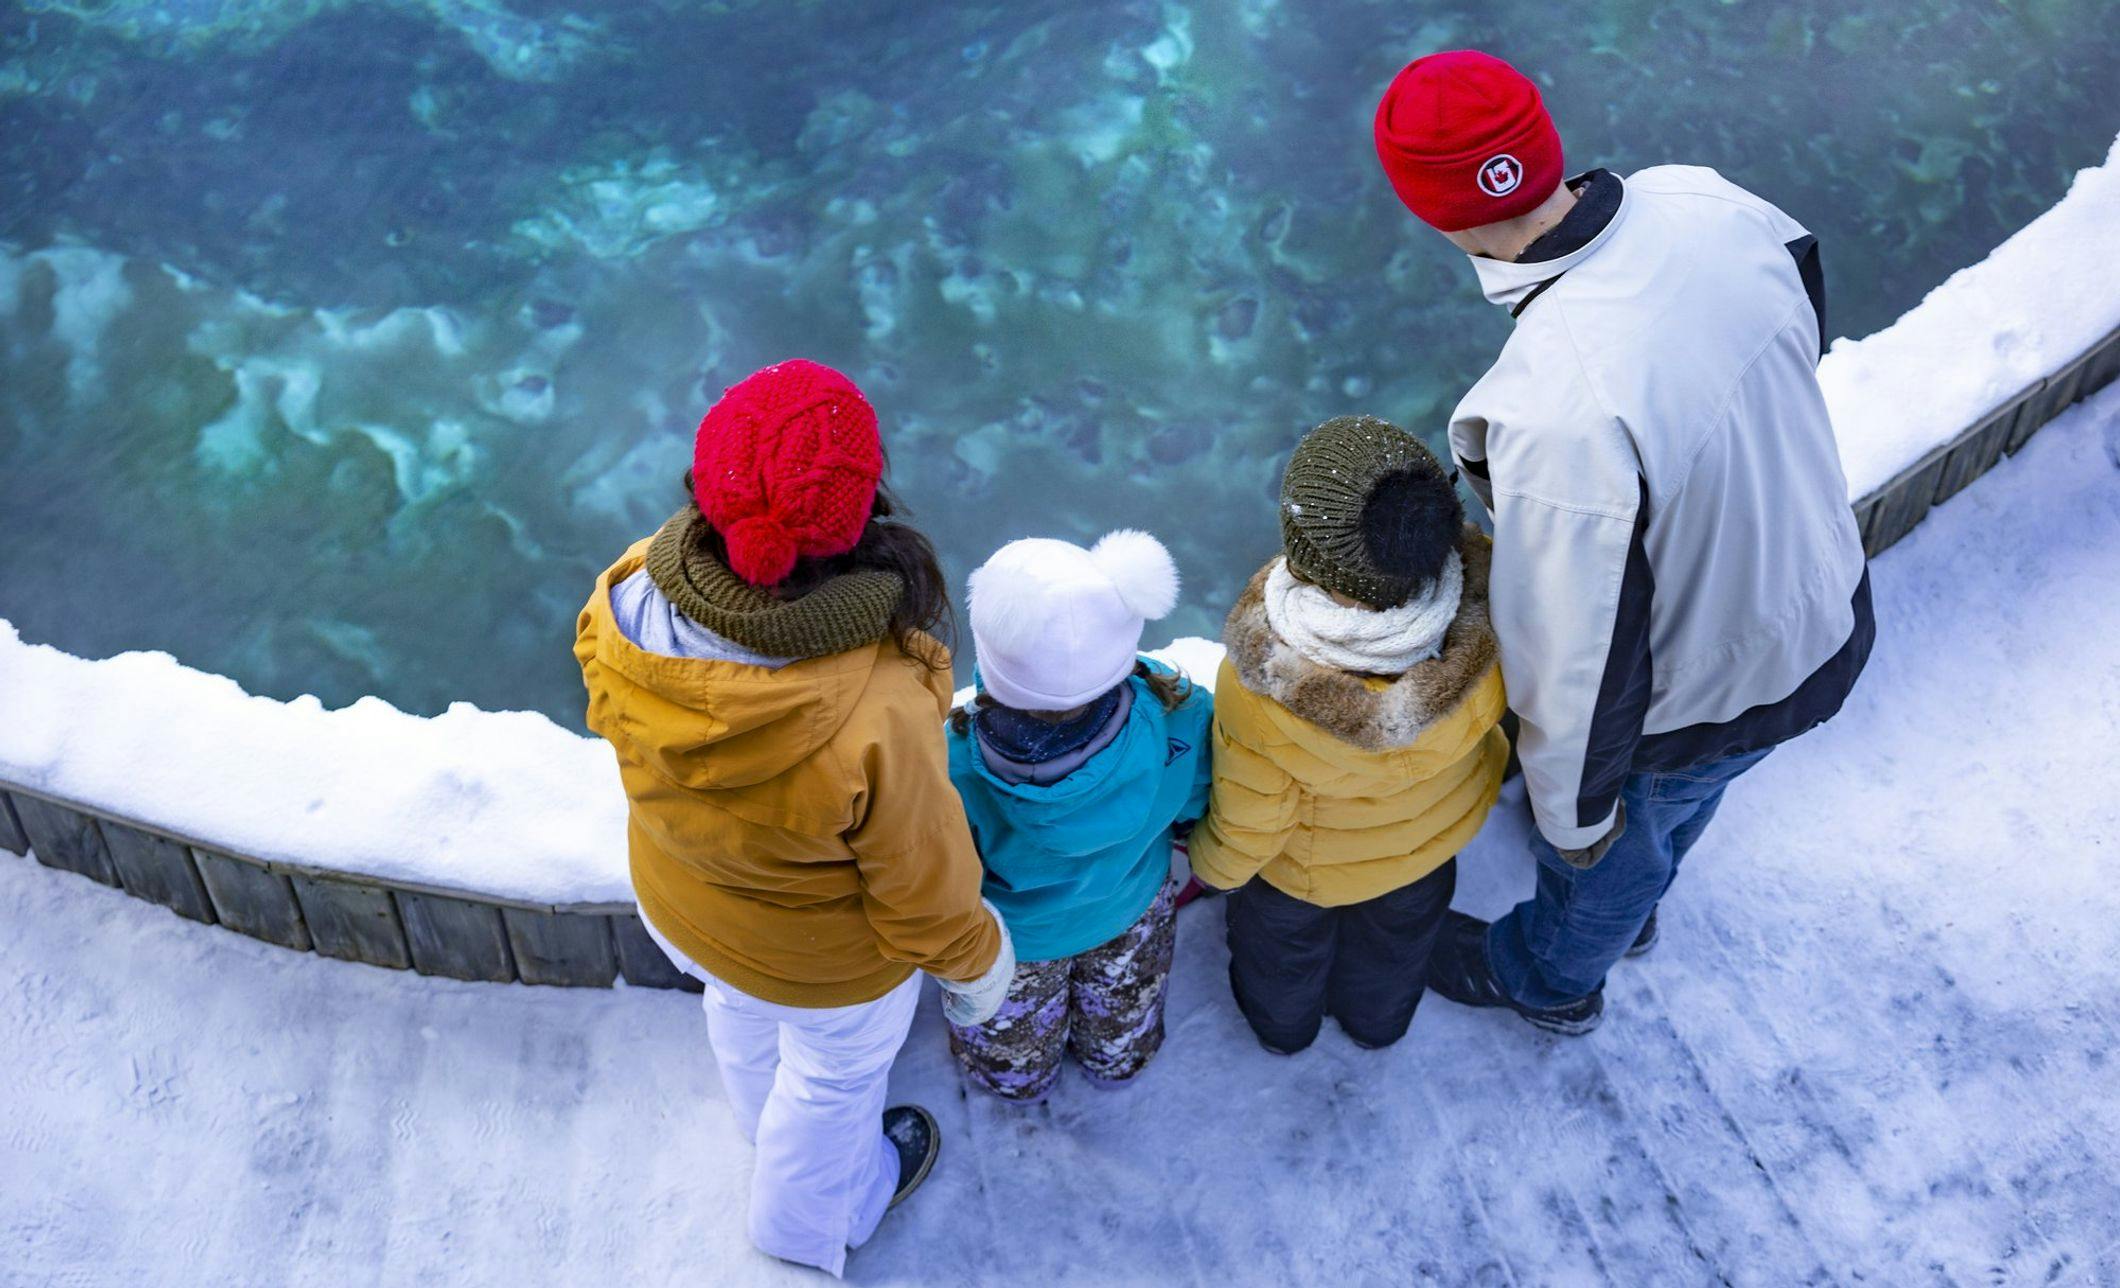 A family of four bundled up for a chilly winter day look into a natural hot spring pool 